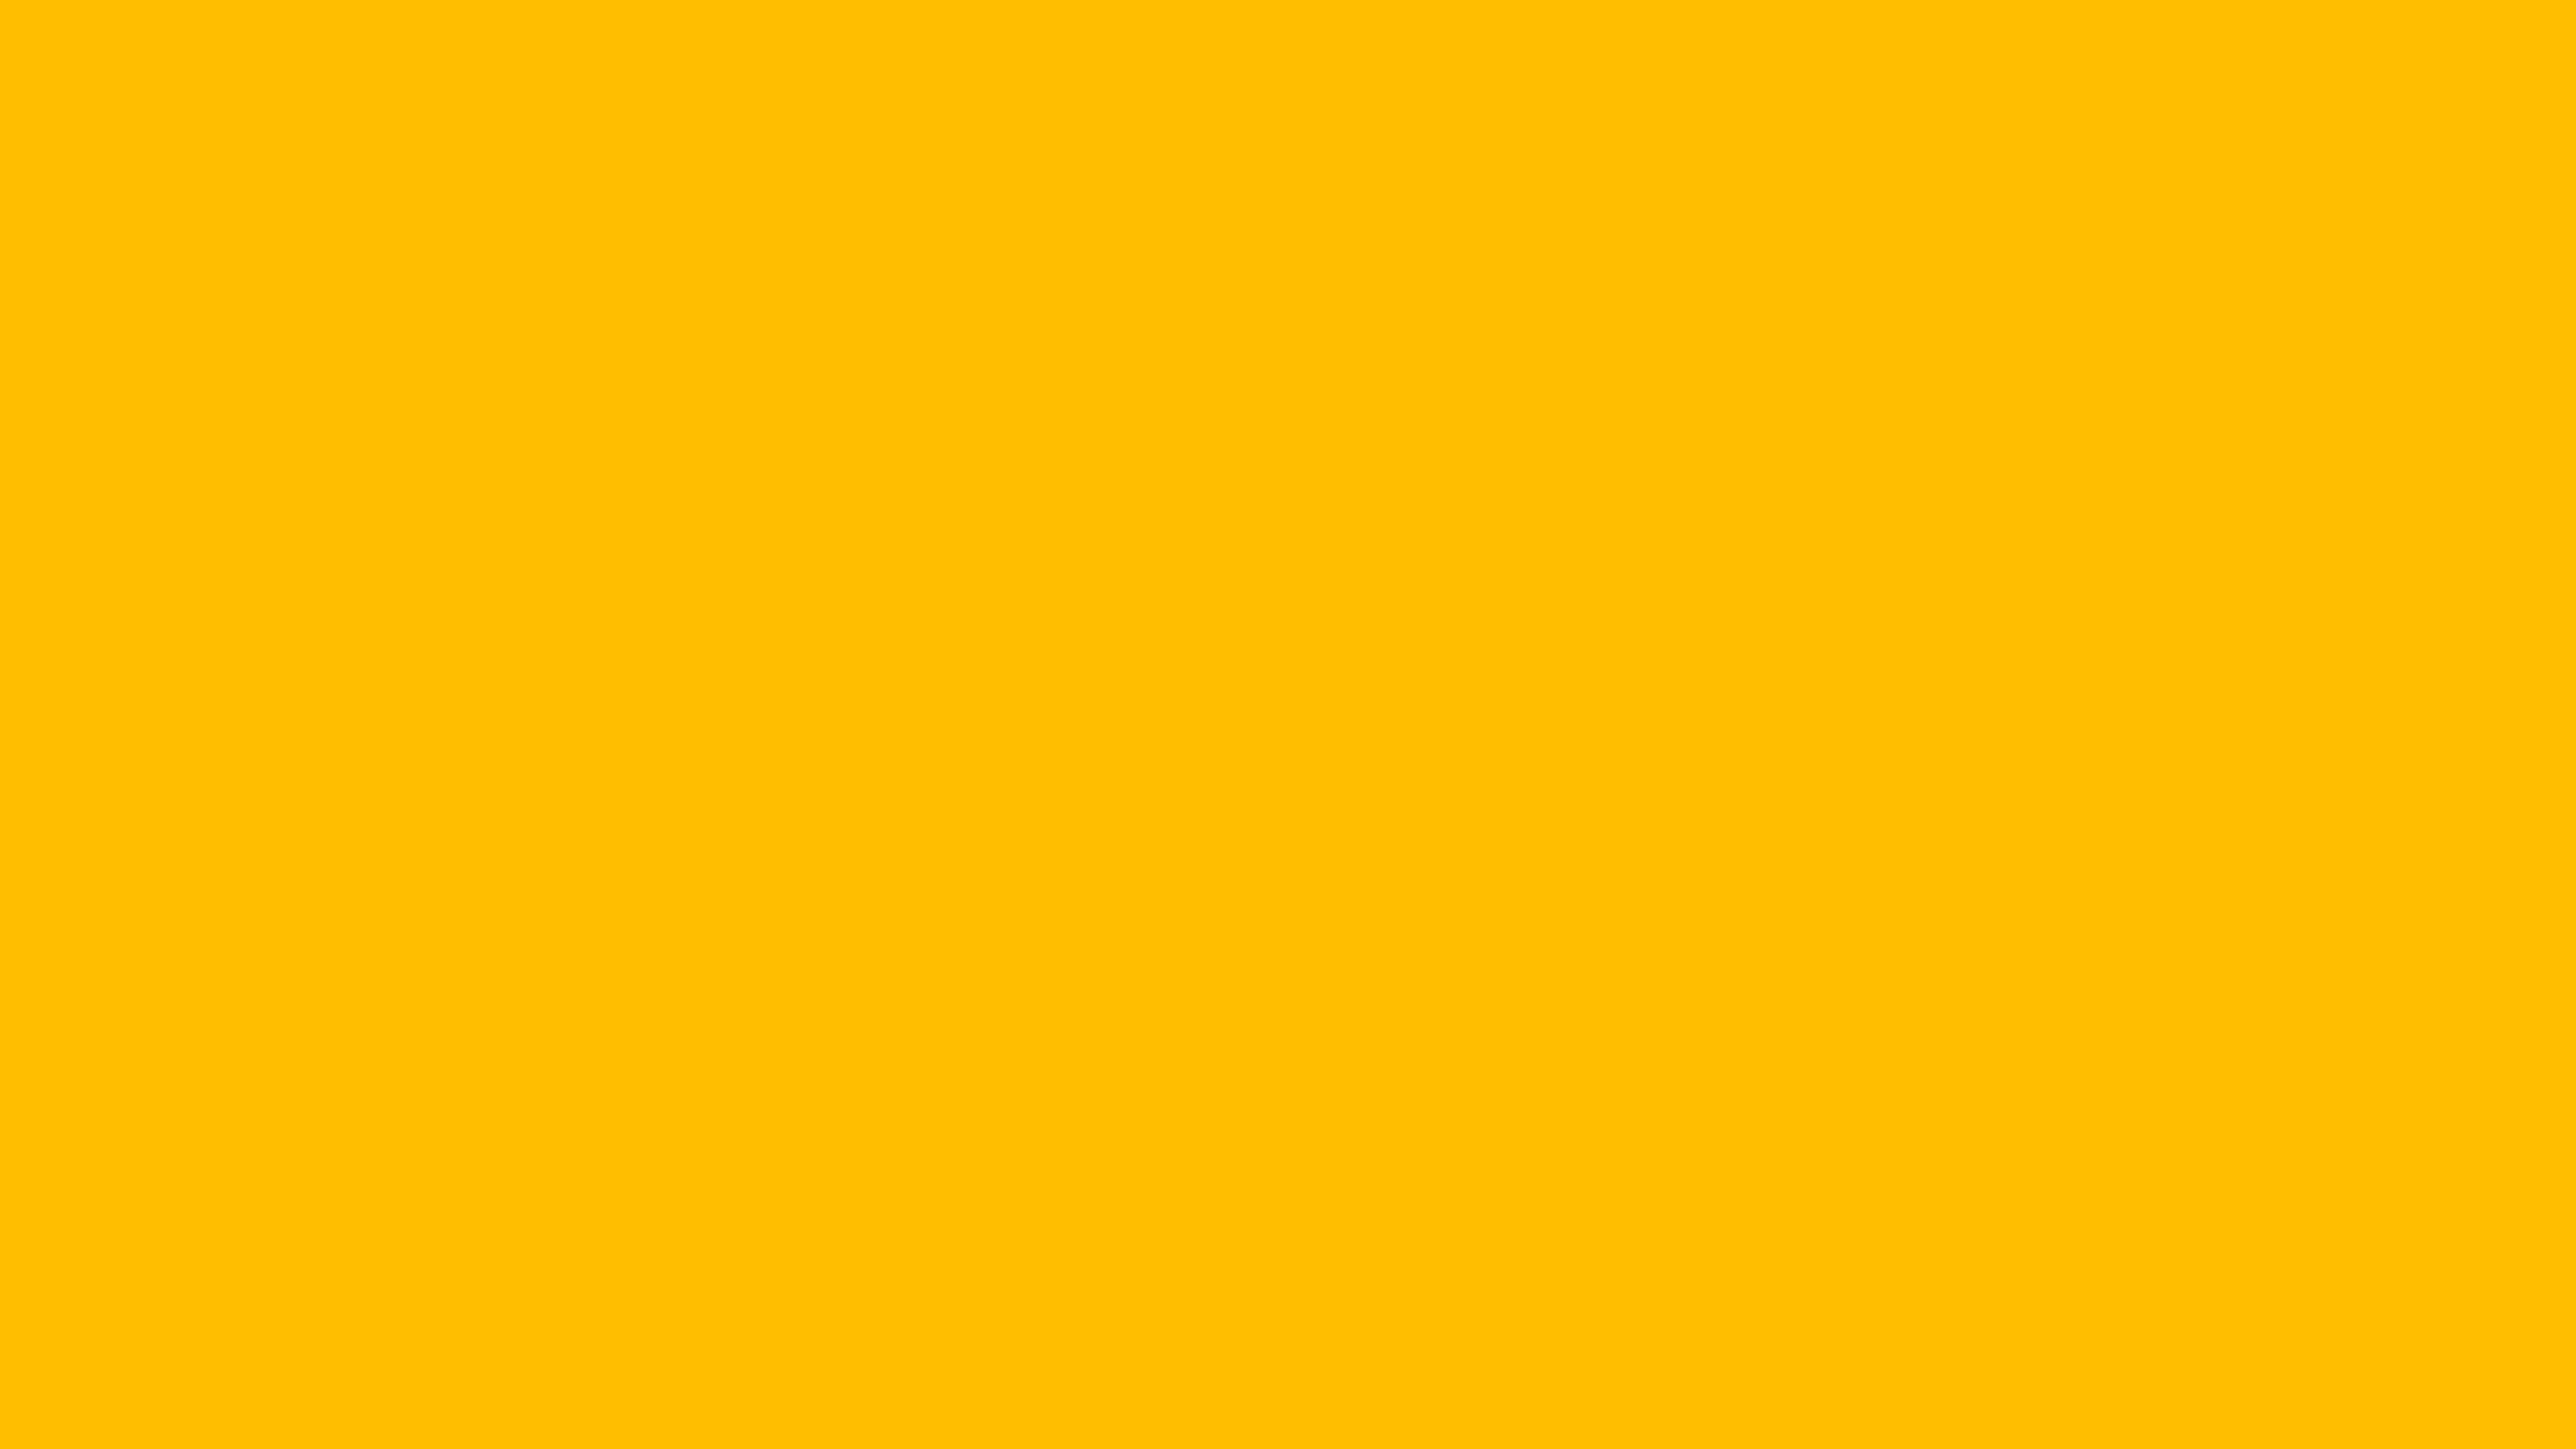 7680x4320 Amber Solid Color Background